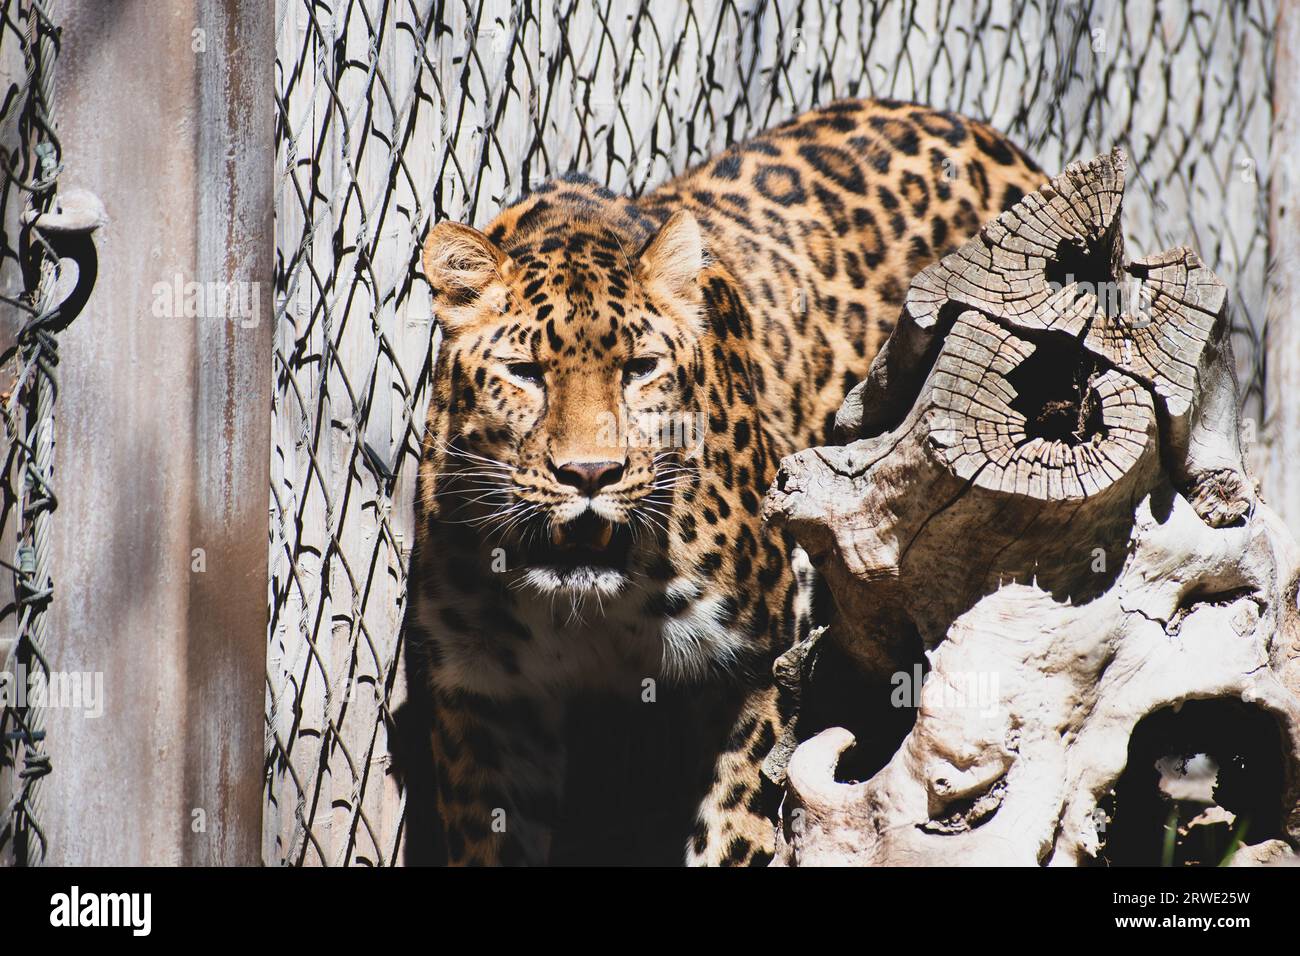 An Amur Leopard next to a fence in a Zoo enclosure; with spot pattern fur. Stock Photo